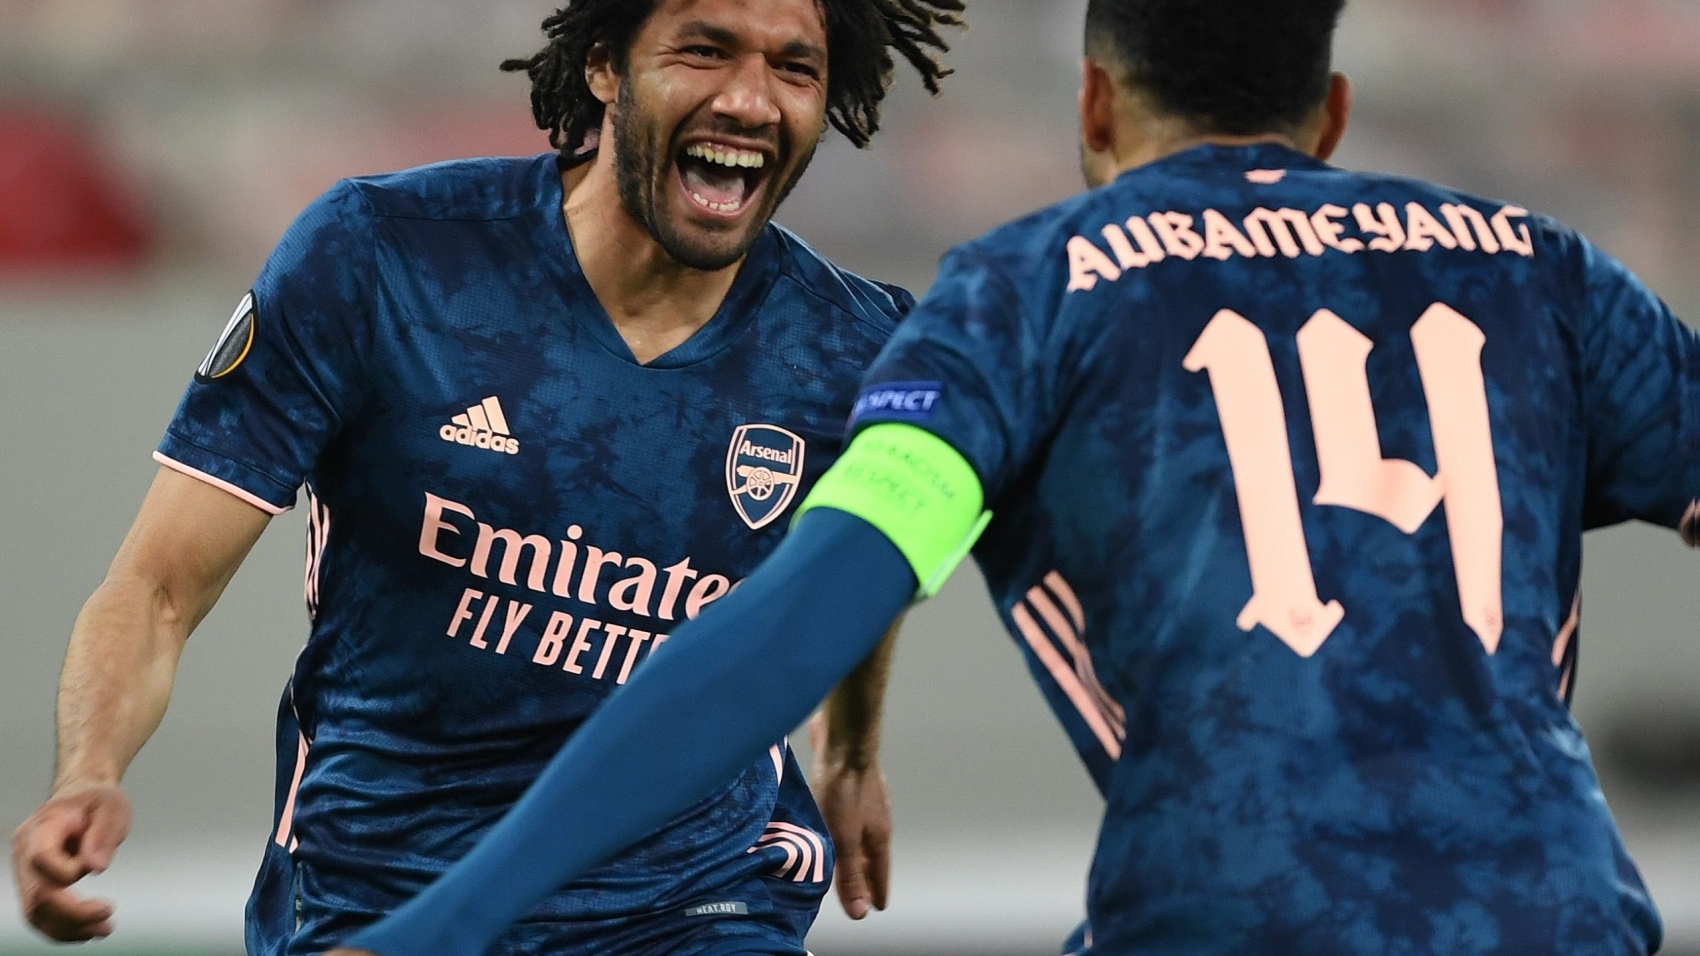 PIRAEUS, GREECE - MARCH 11: (L) Mo Elneny celebrates scoring the 3rd Arsenal goal with (R) Pierre-Emerick Aubameyang during the UEFA Europa League Round of 16 First Leg match between Olympiacos and Arsenal at Karaiskakis Stadium on March 11, 2021 in Piraeus, Greece. Sporting stadiums around Europe remain under strict restrictions due to the Coronavirus Pandemic as Government social distancing laws prohibit fans inside venues resulting in games being played behind closed doors. (Photo by Stuart MacFarlane/Arsenal FC via Getty Images)